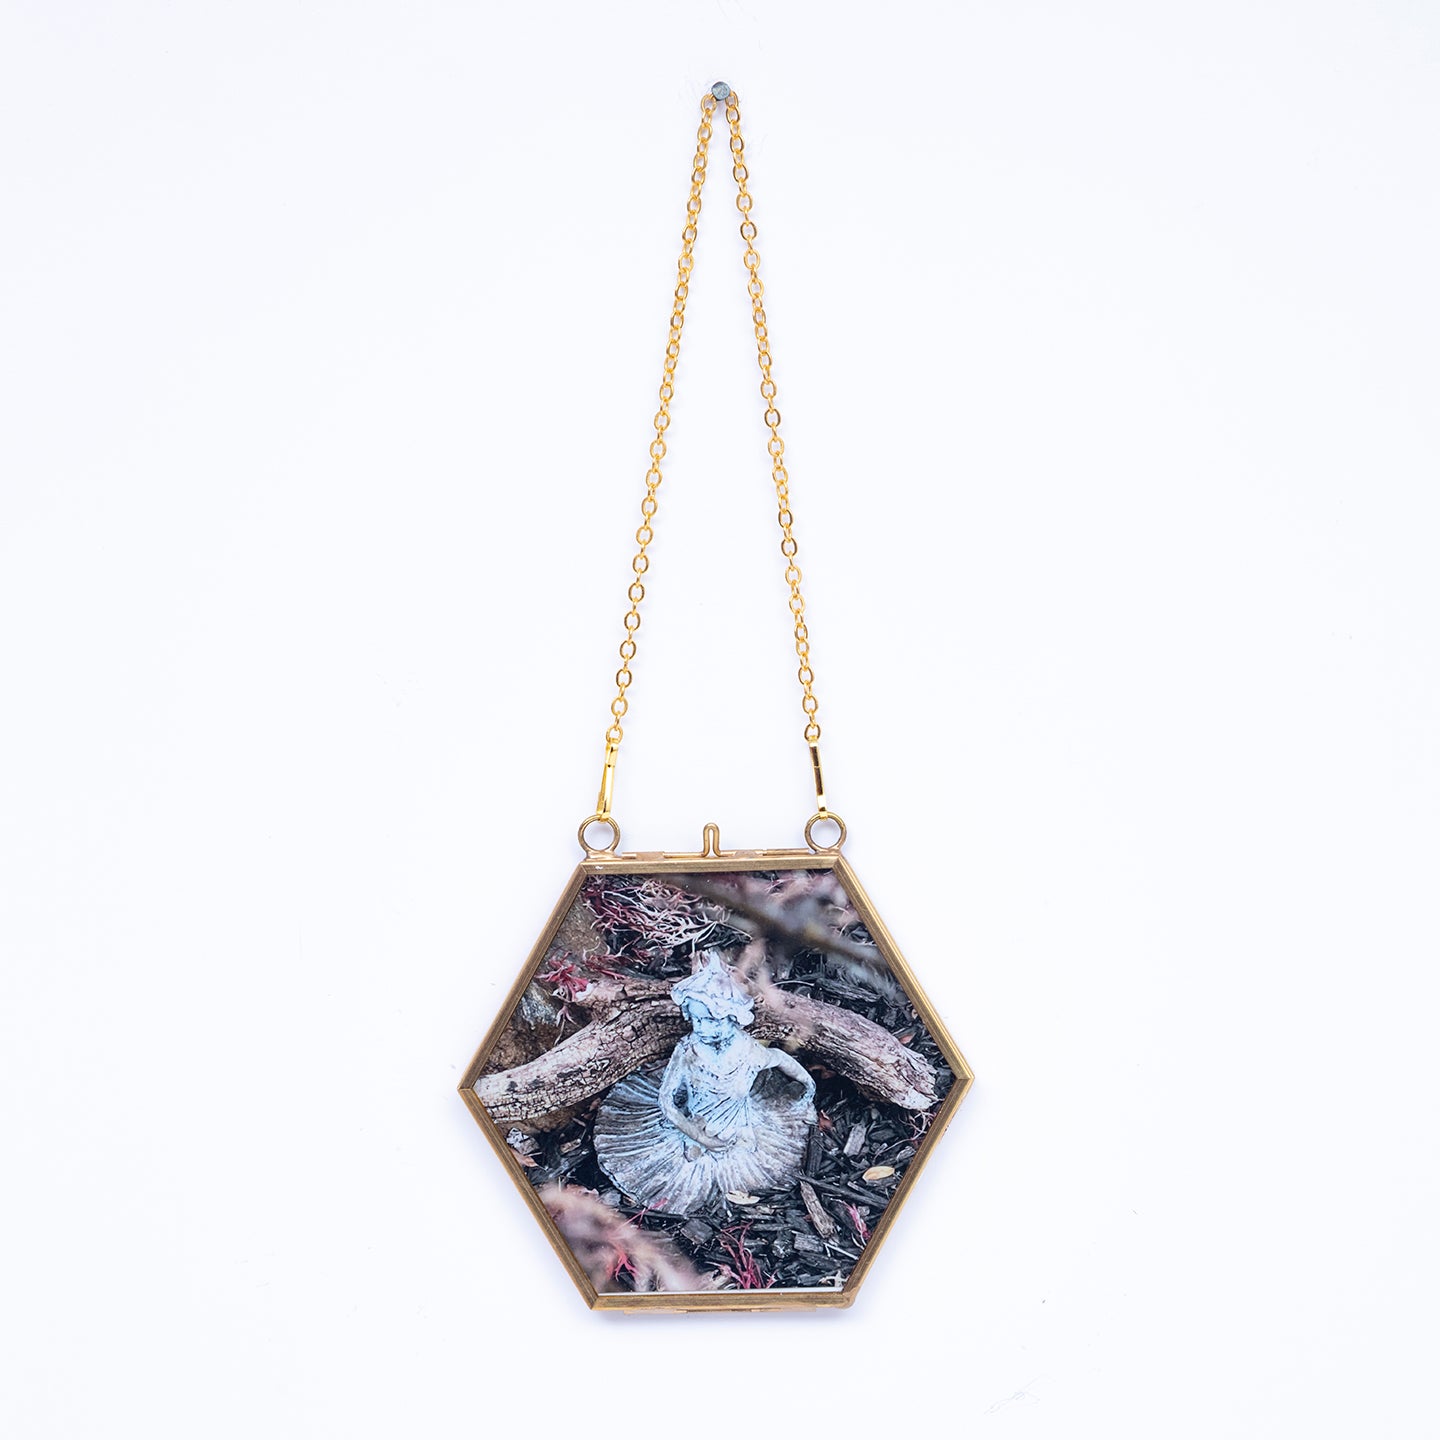 Hexagon shaped frames with artistic images of nature title Wood U from Everyday Art Editions